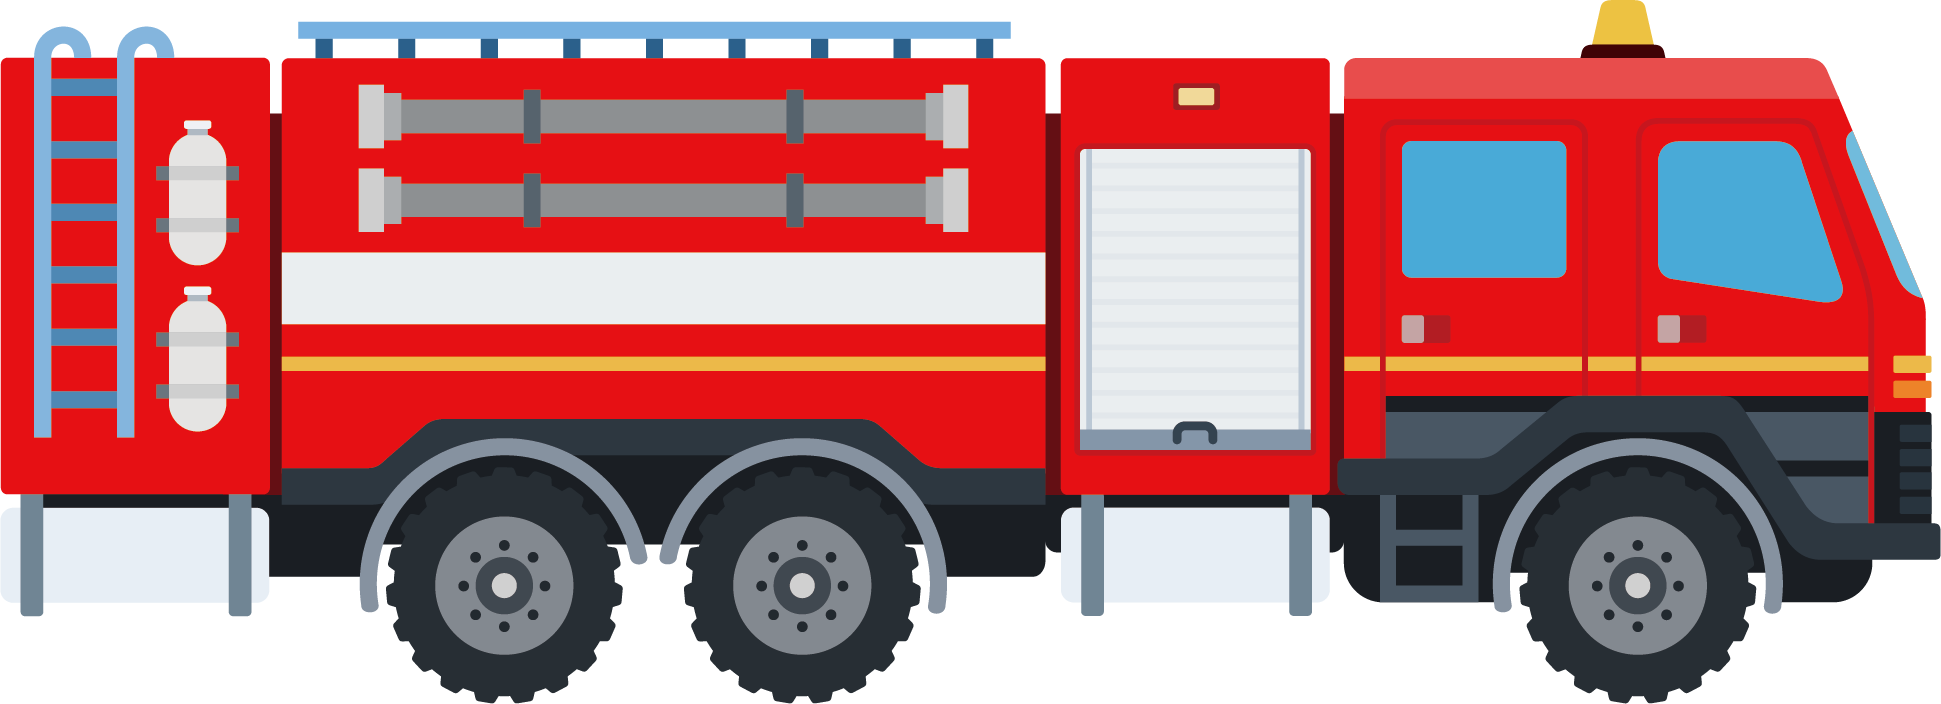 Download and share clipart about Fire Engine Car Fire Department Firefighte...